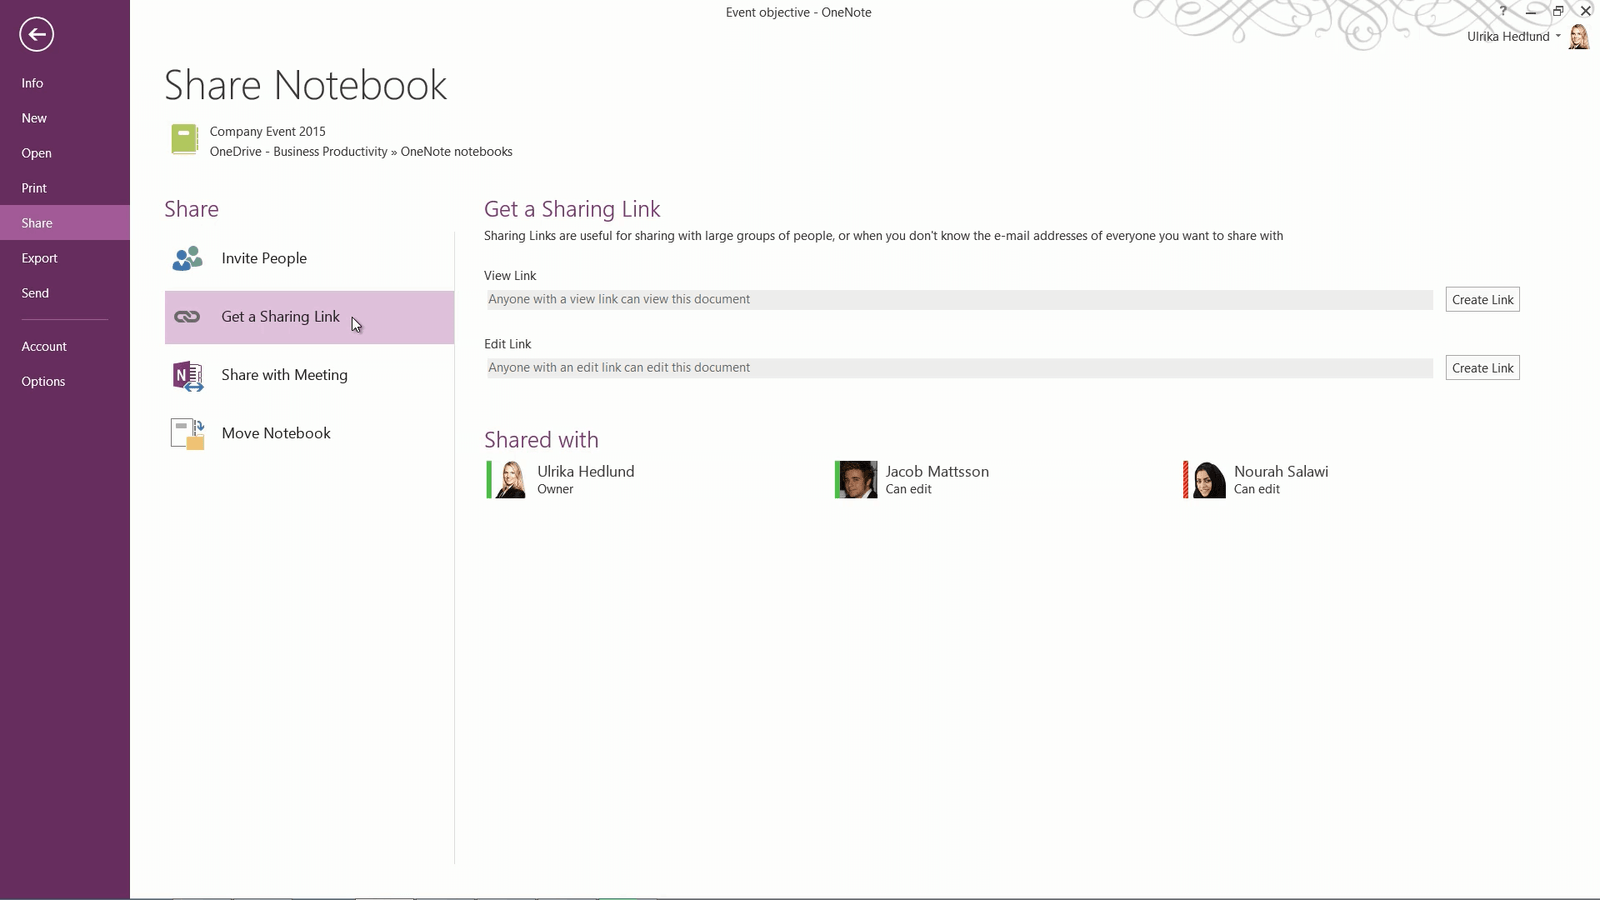 Stay up to date with a shared notebook